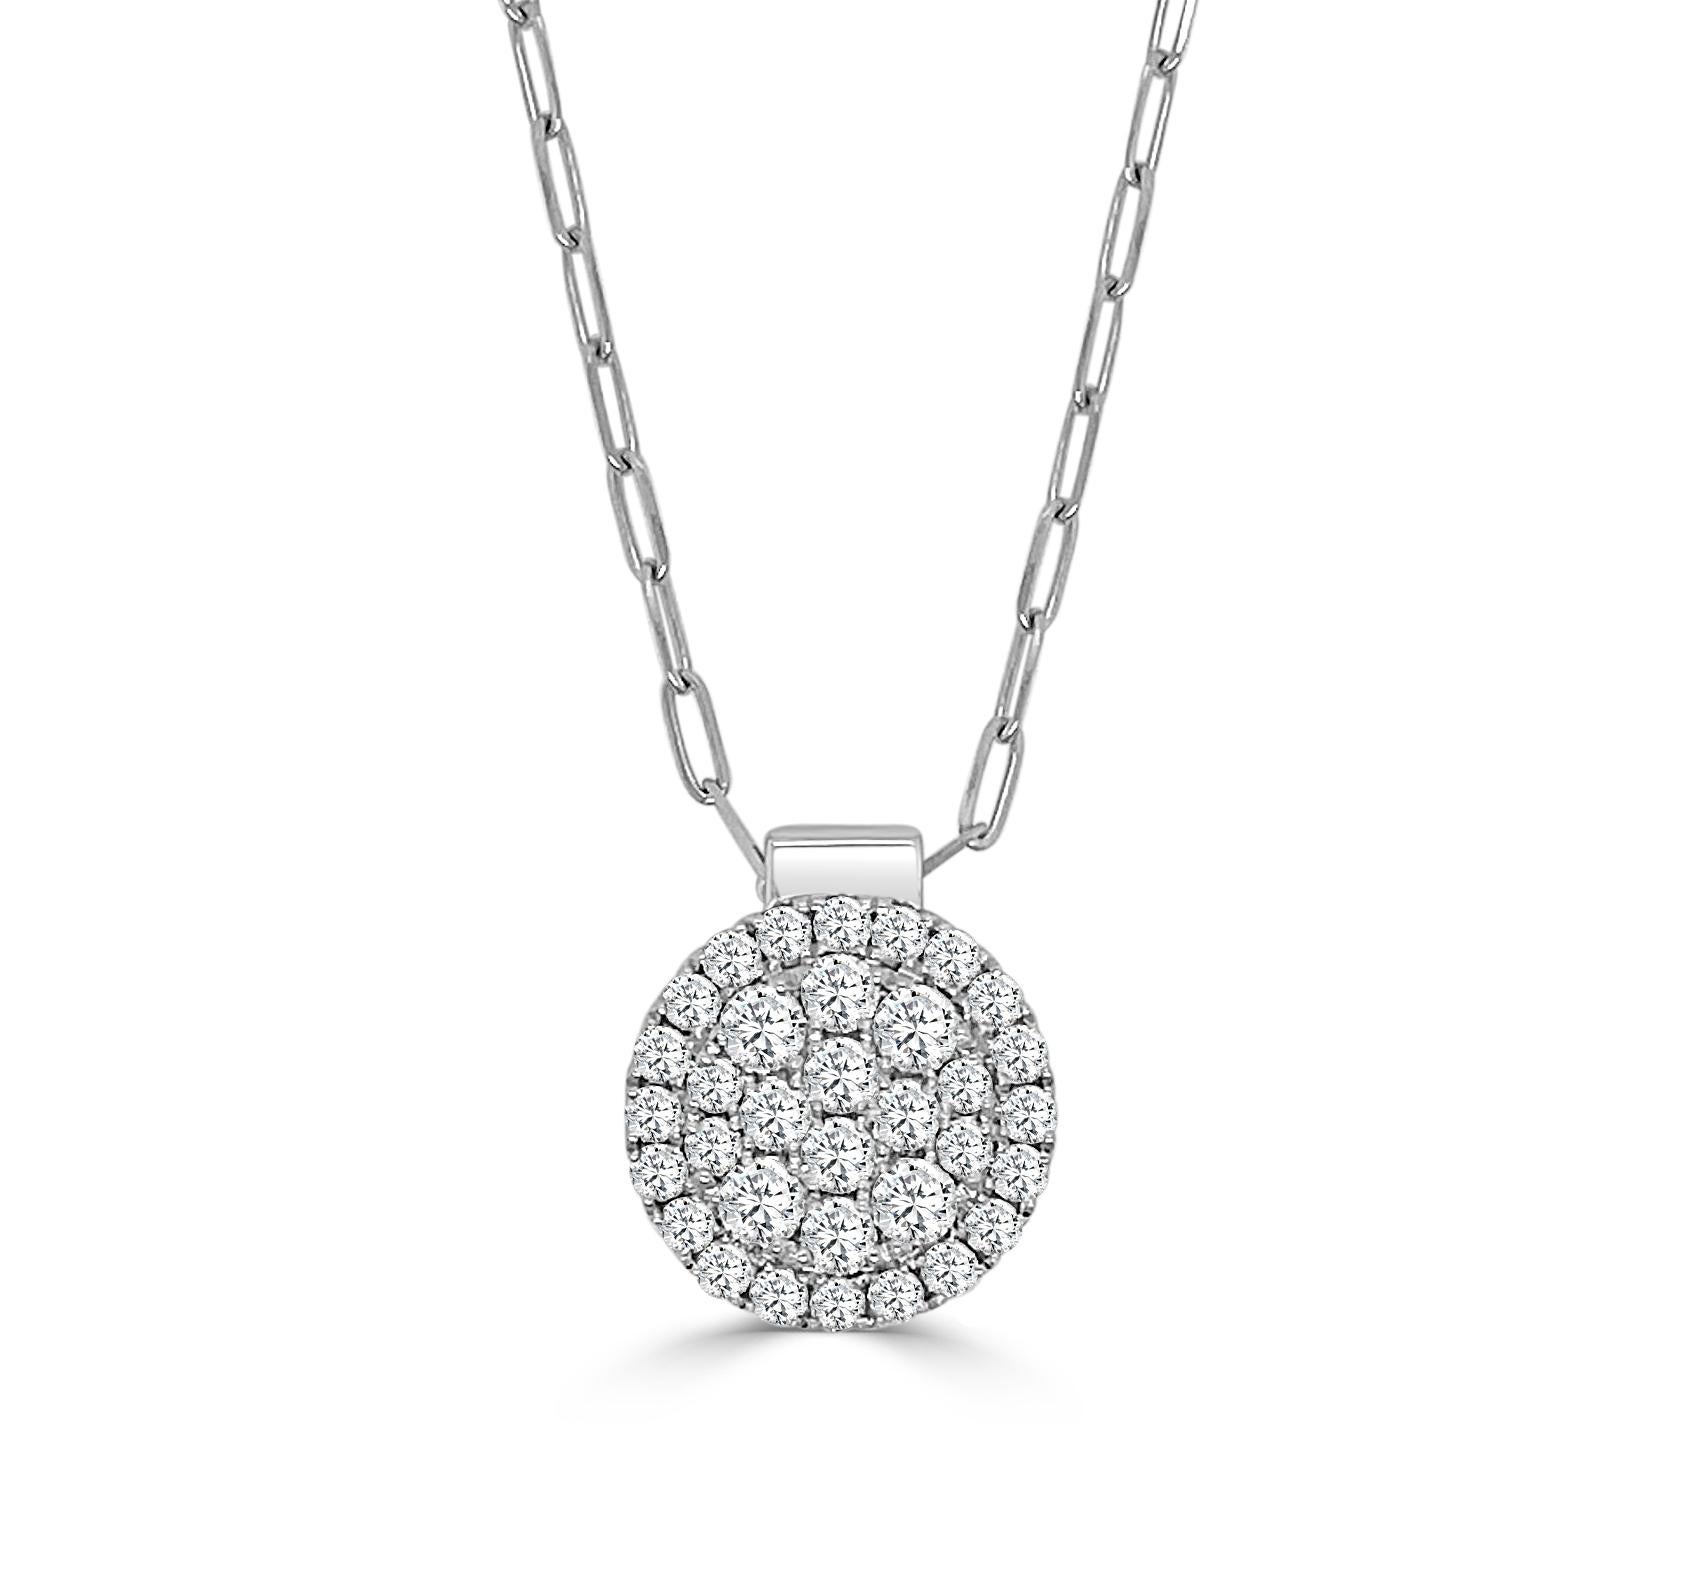 Frederic Sage Pendentif en or blanc 14 carats taille moyenne 2 rond Firenze ii diamants Neuf - En vente à Great Neck, NY